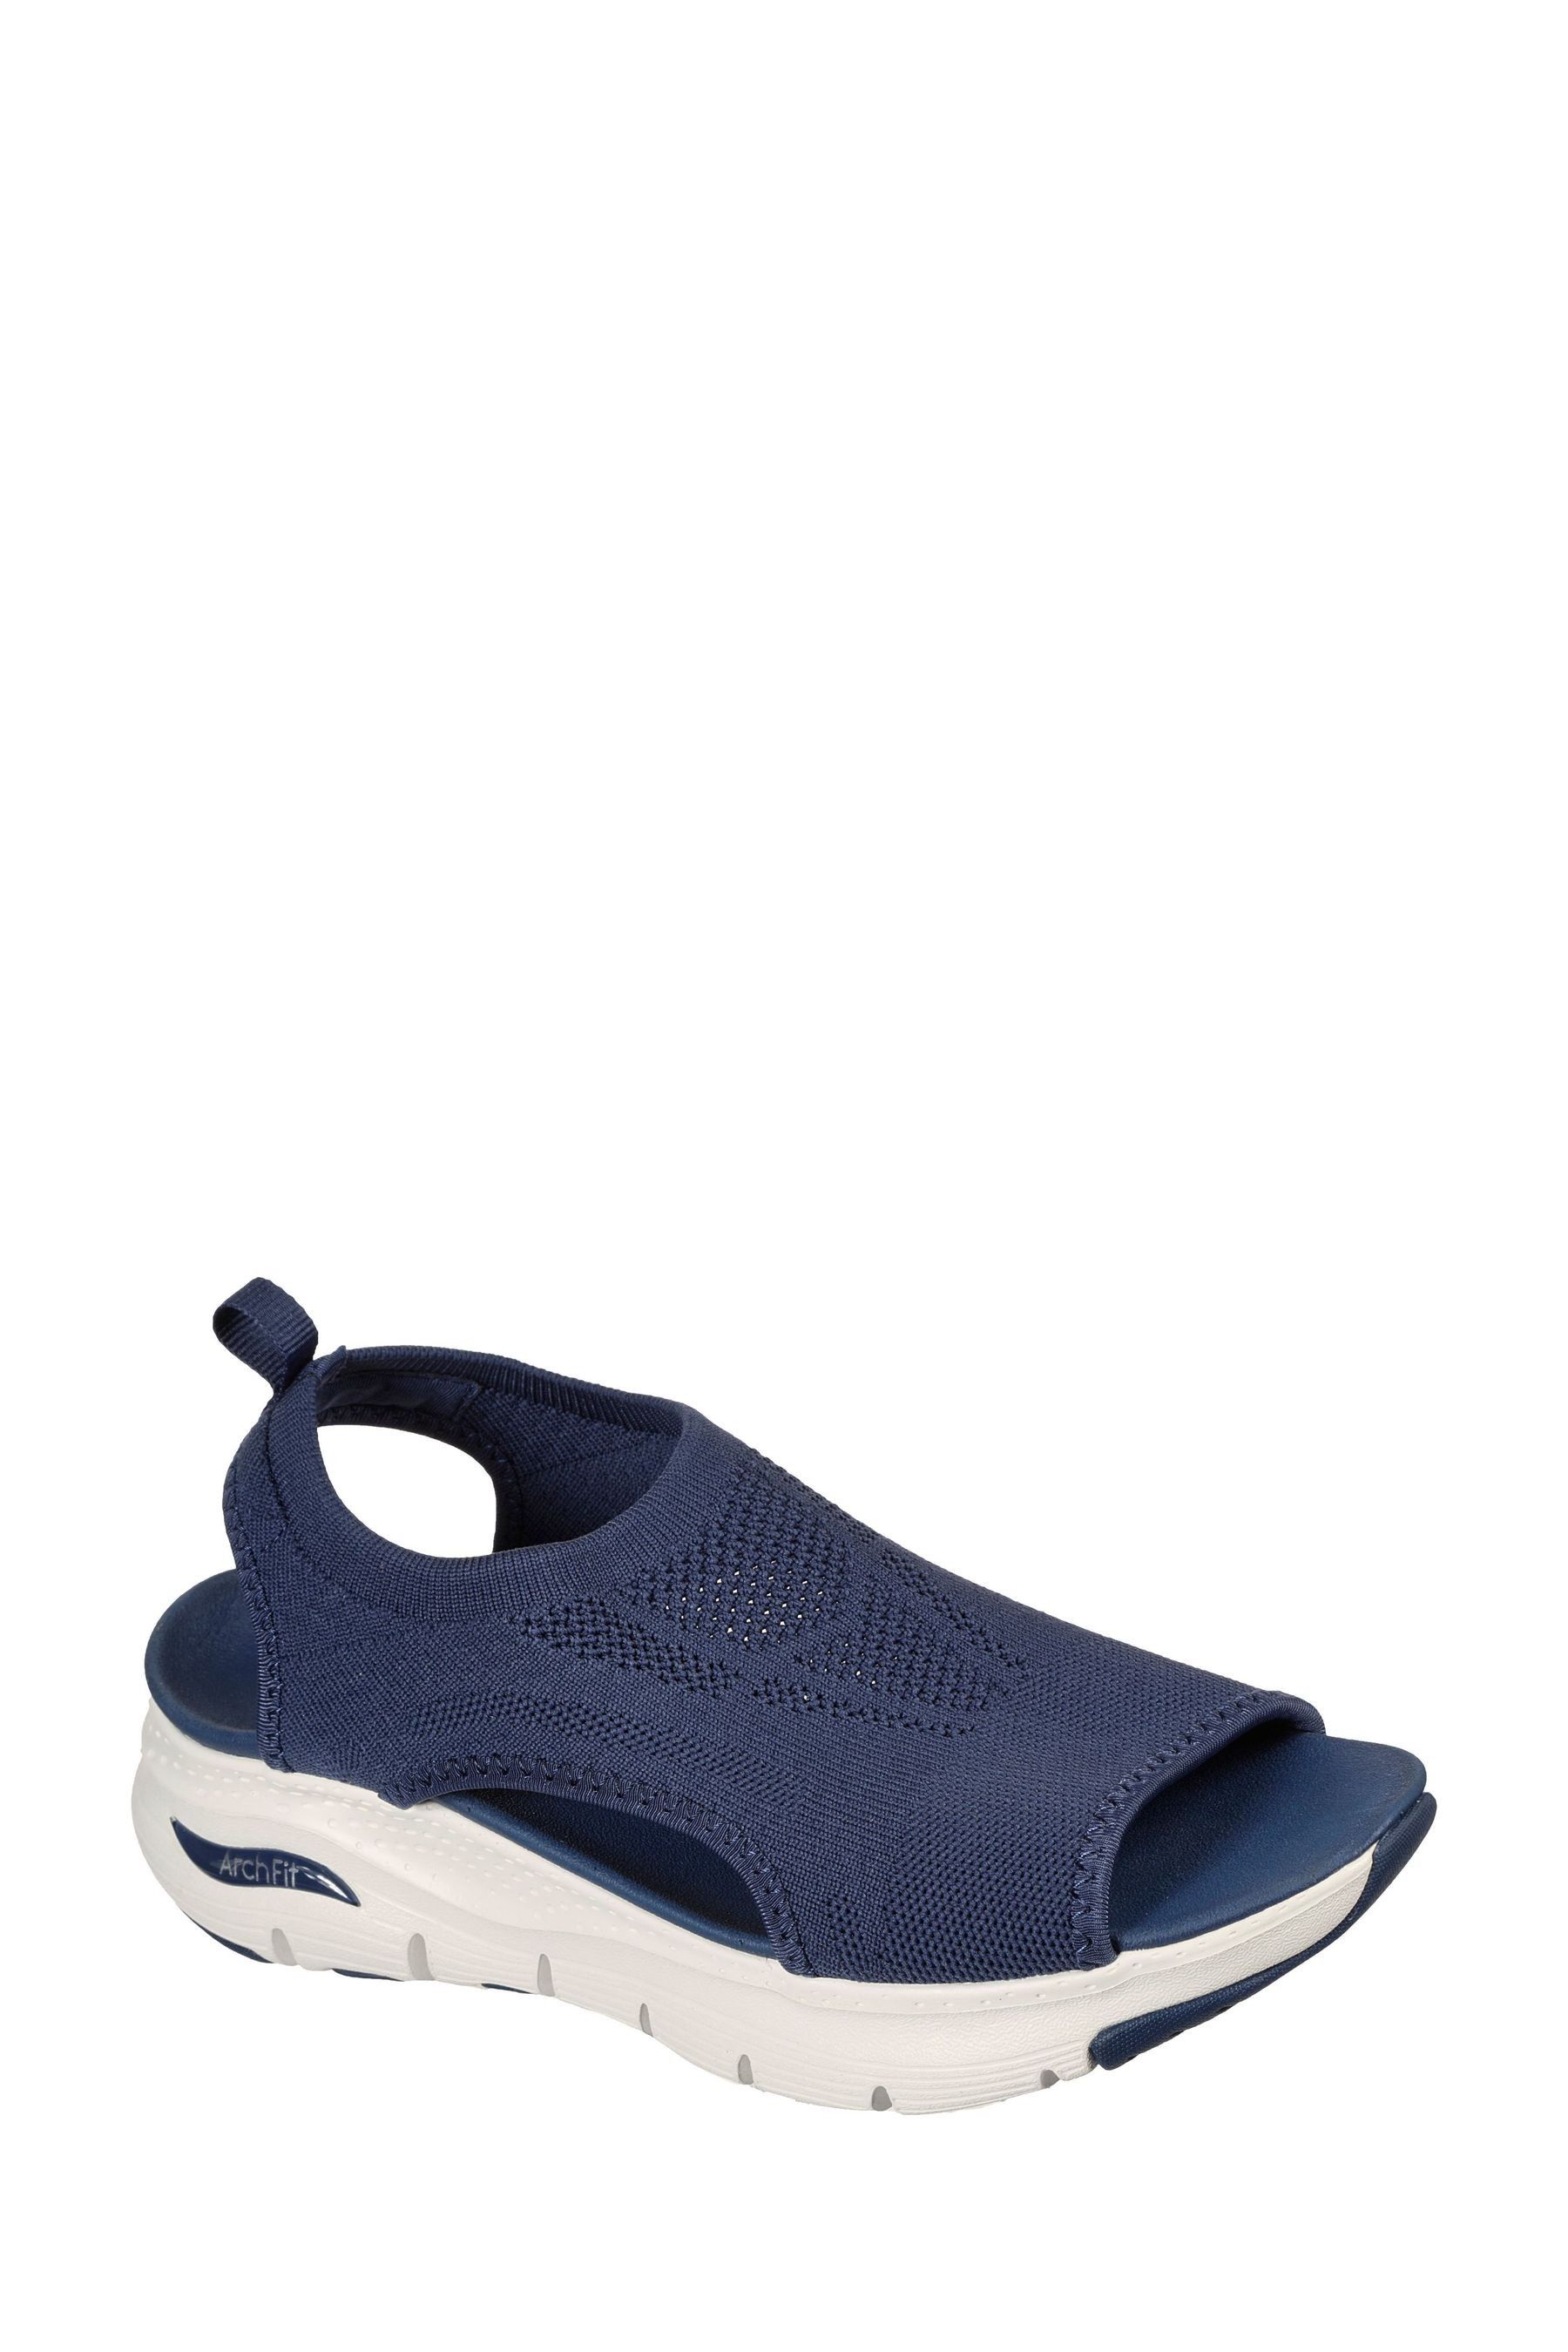 Buy Skechers Arch Fit City Catch Womens Sandals from Next Ireland